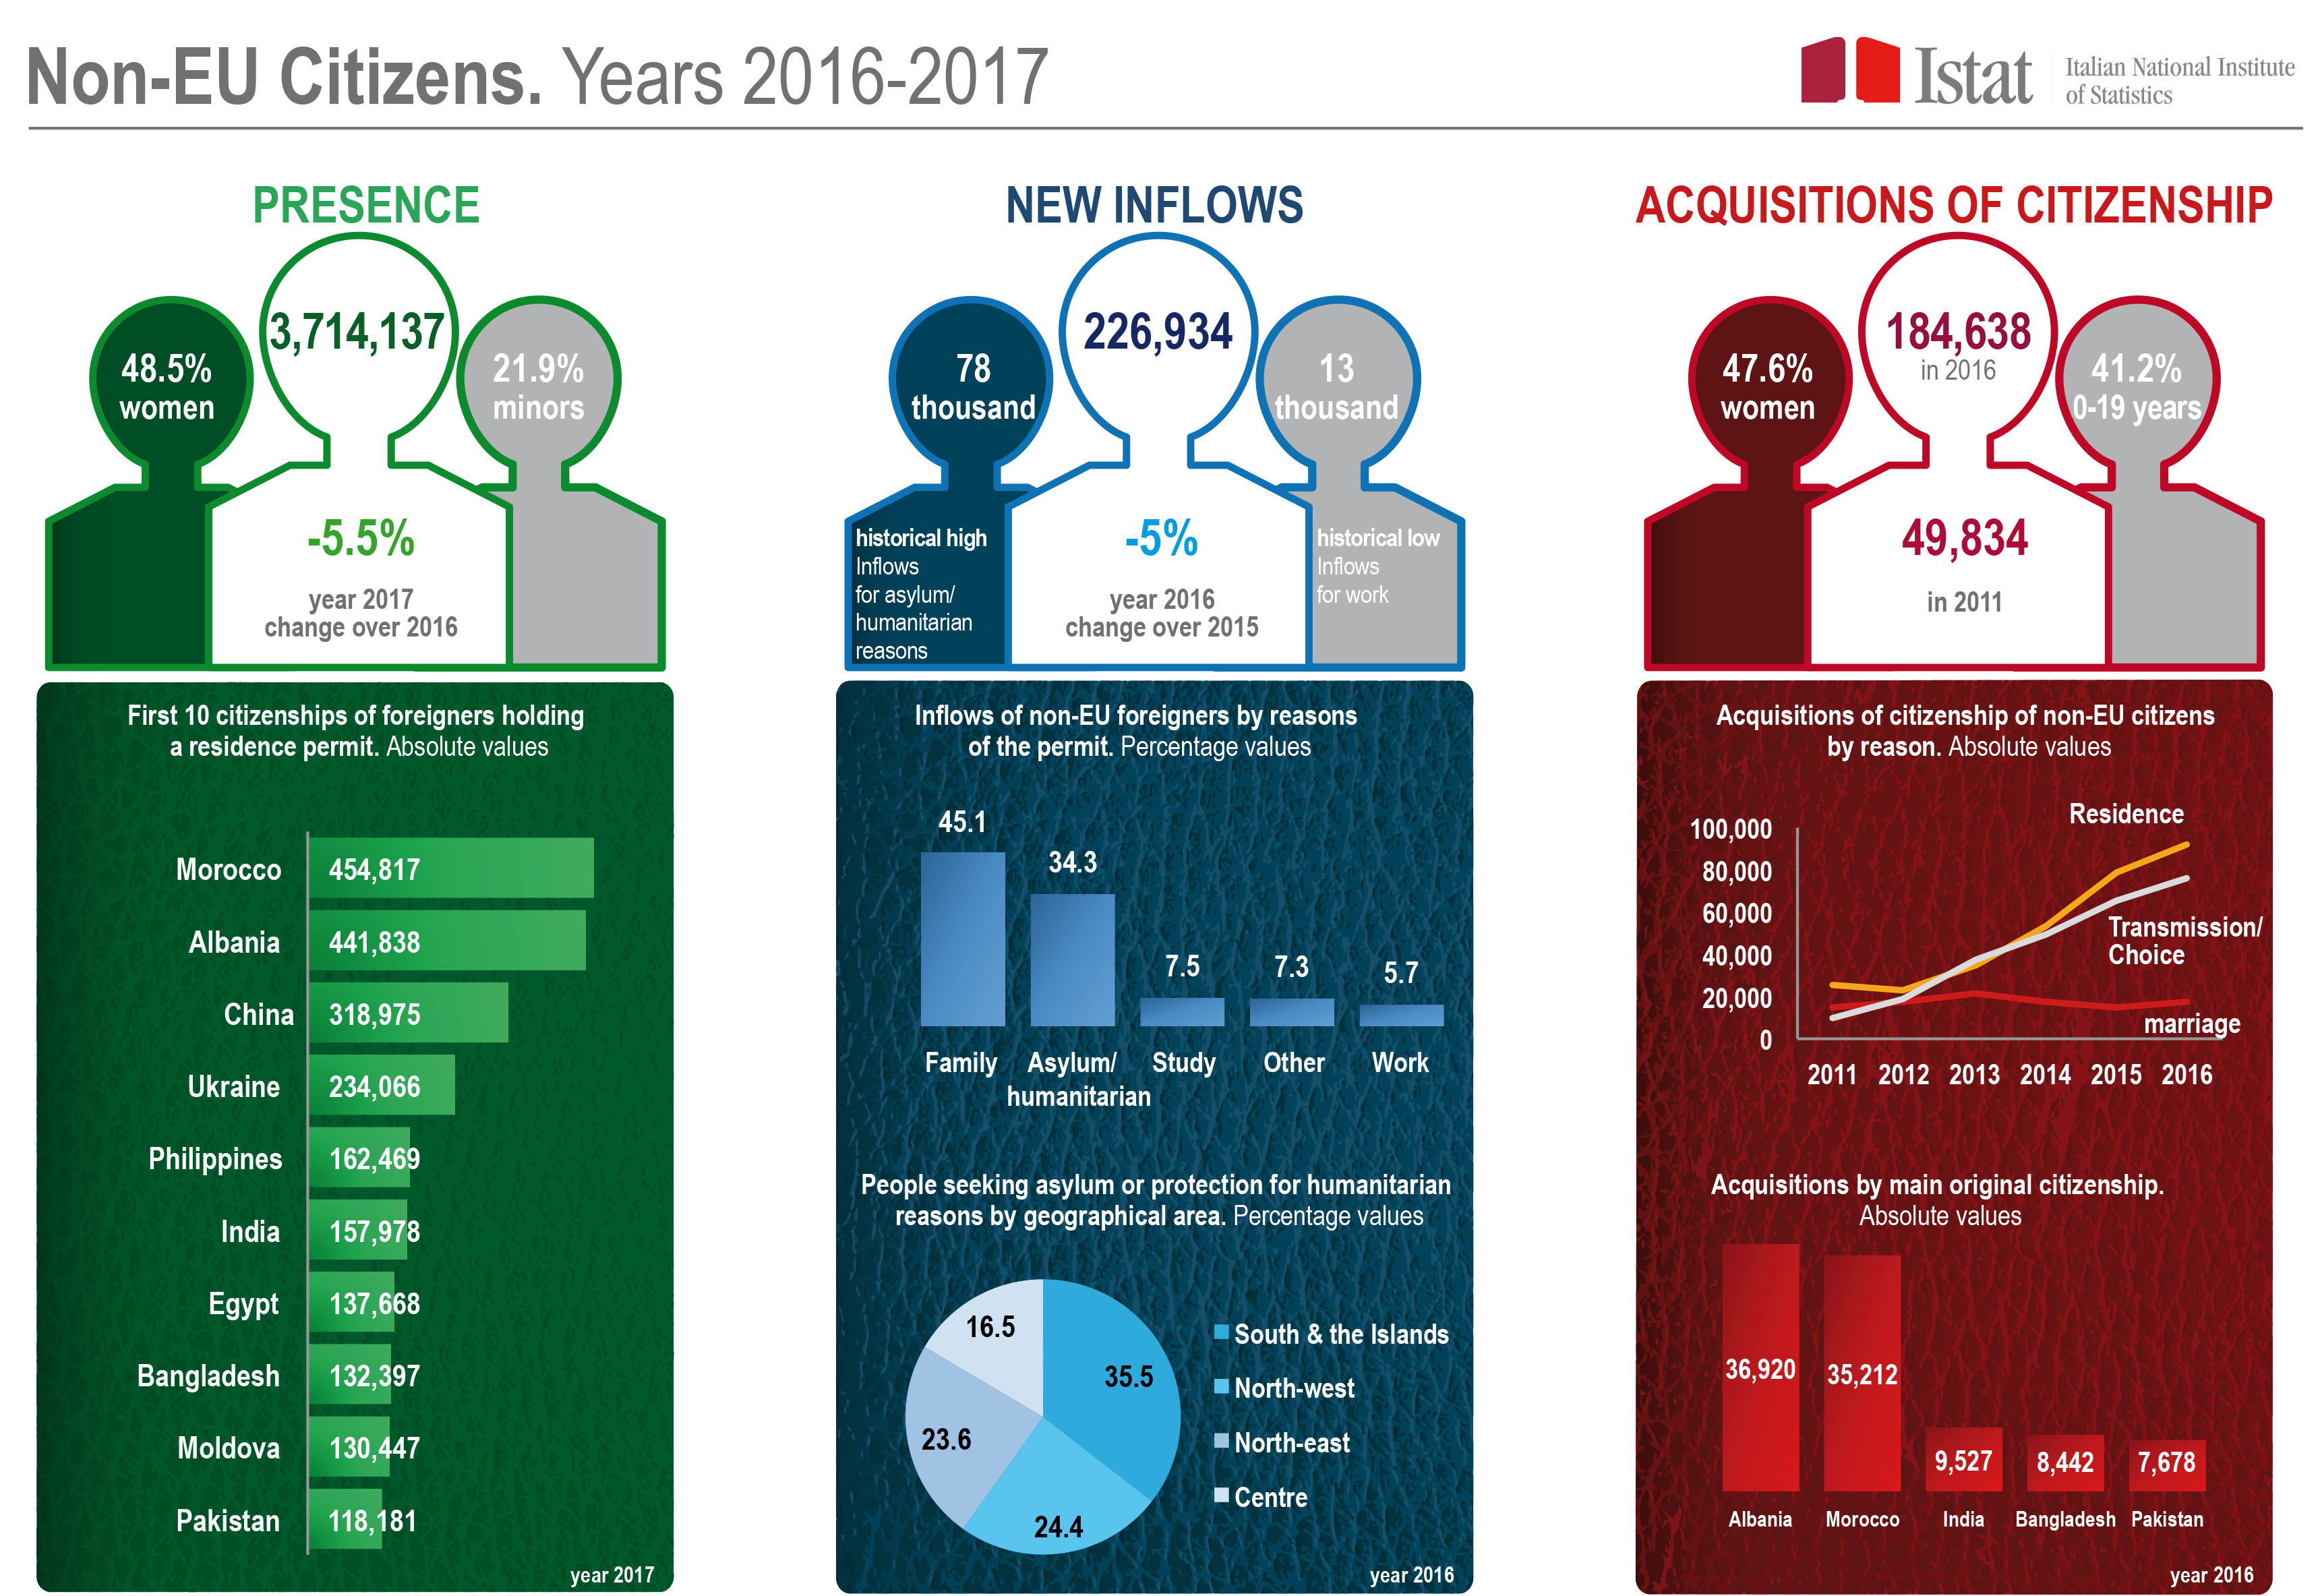 Infographic on Non-EU citizens in Italy. Years 2016-2017